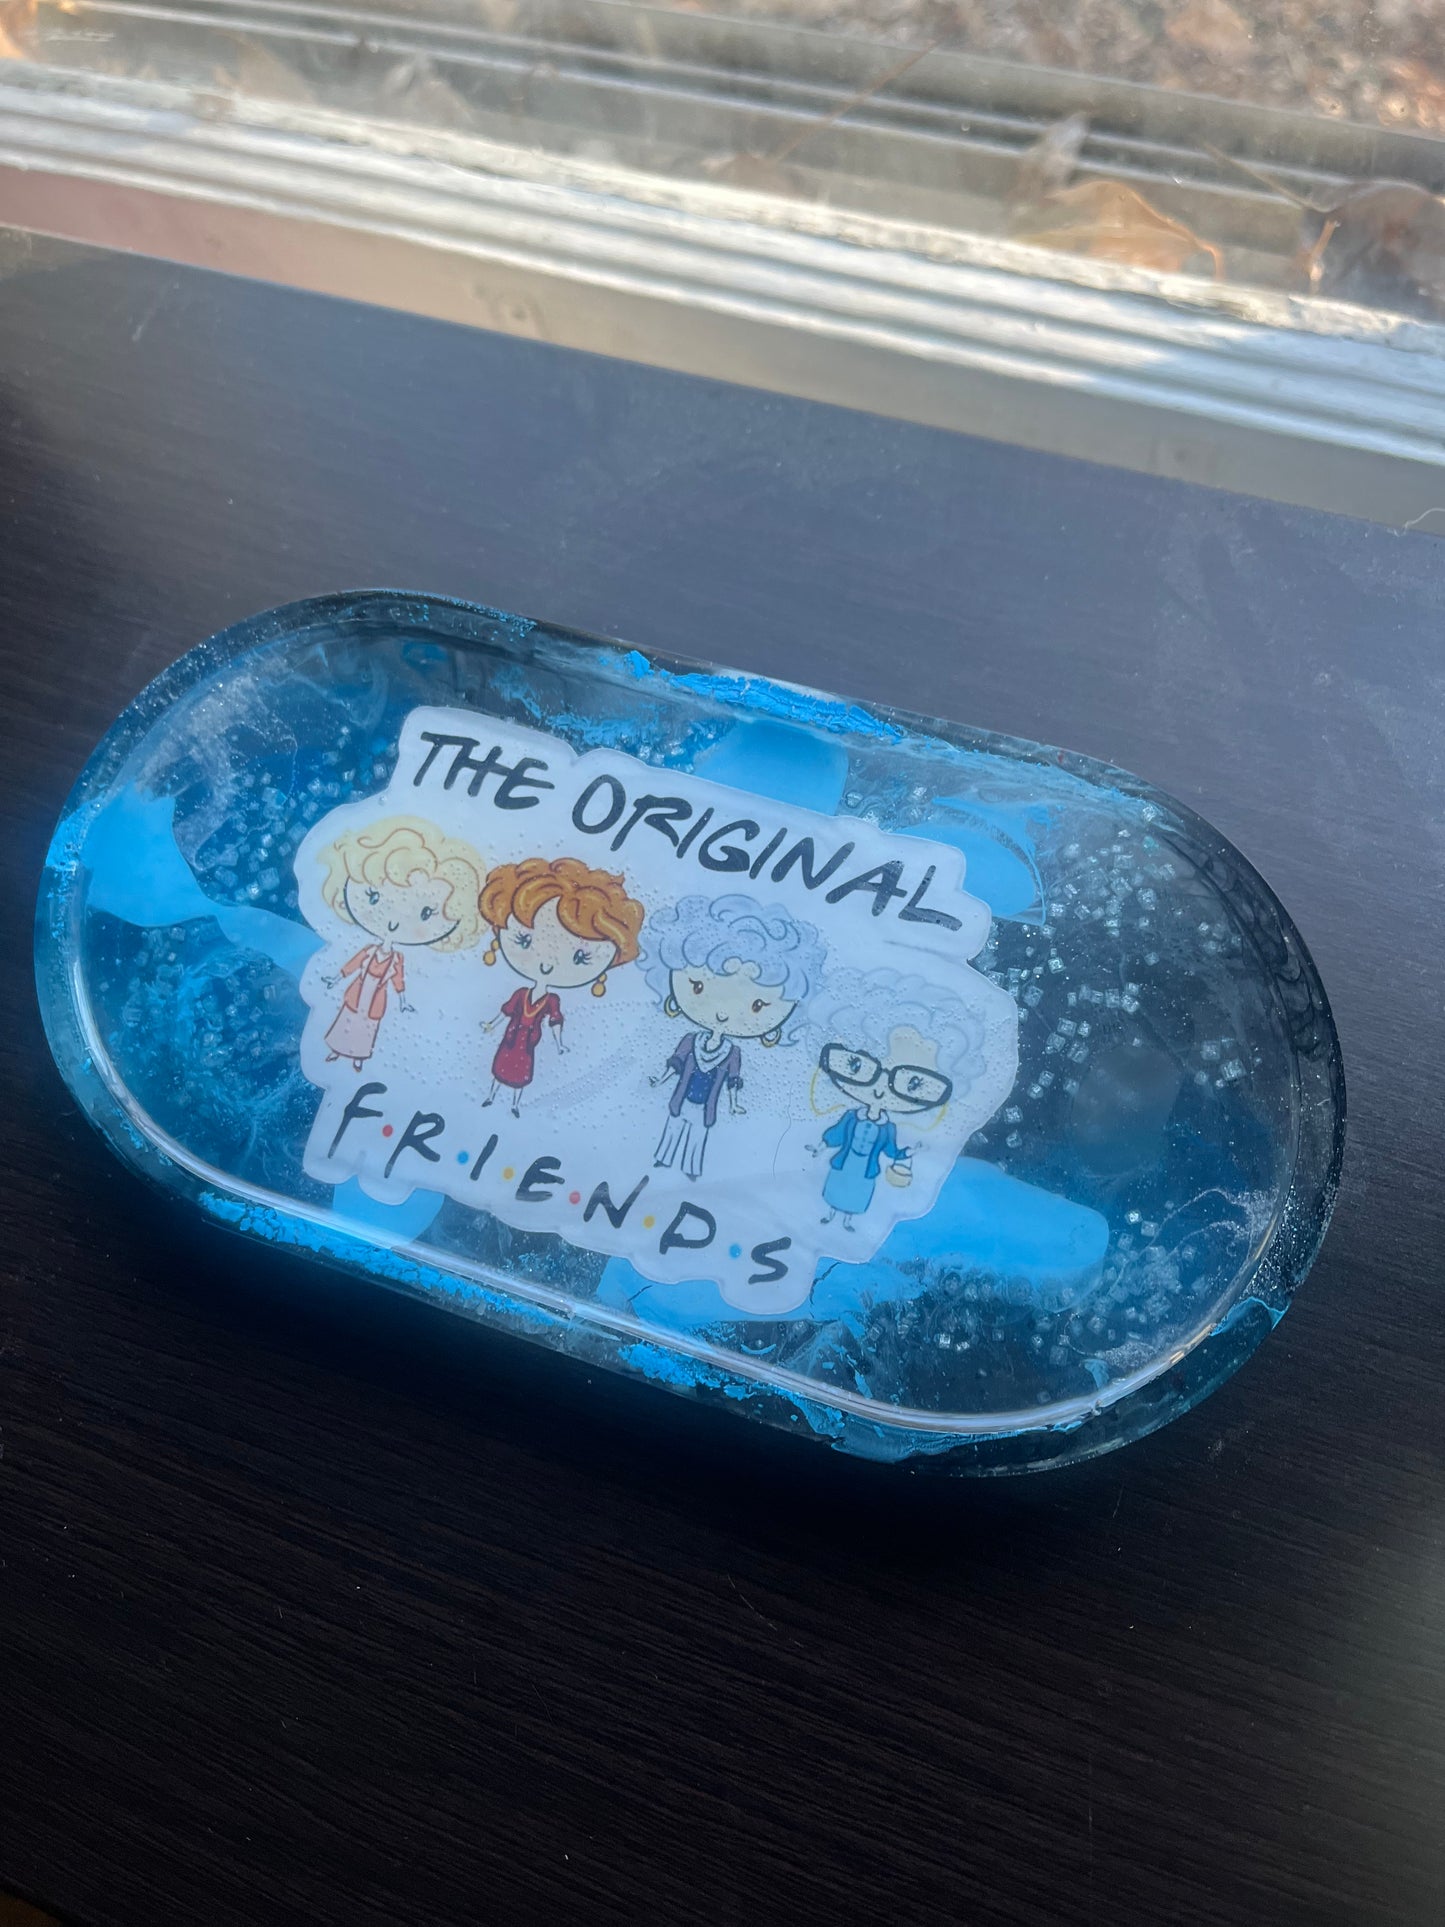 Resin Golden Girls Real Friends Blue Trinket Crystals Jewelry Arts Crafts Money Change Office Supplies Rolling Portable Multi Use Tray